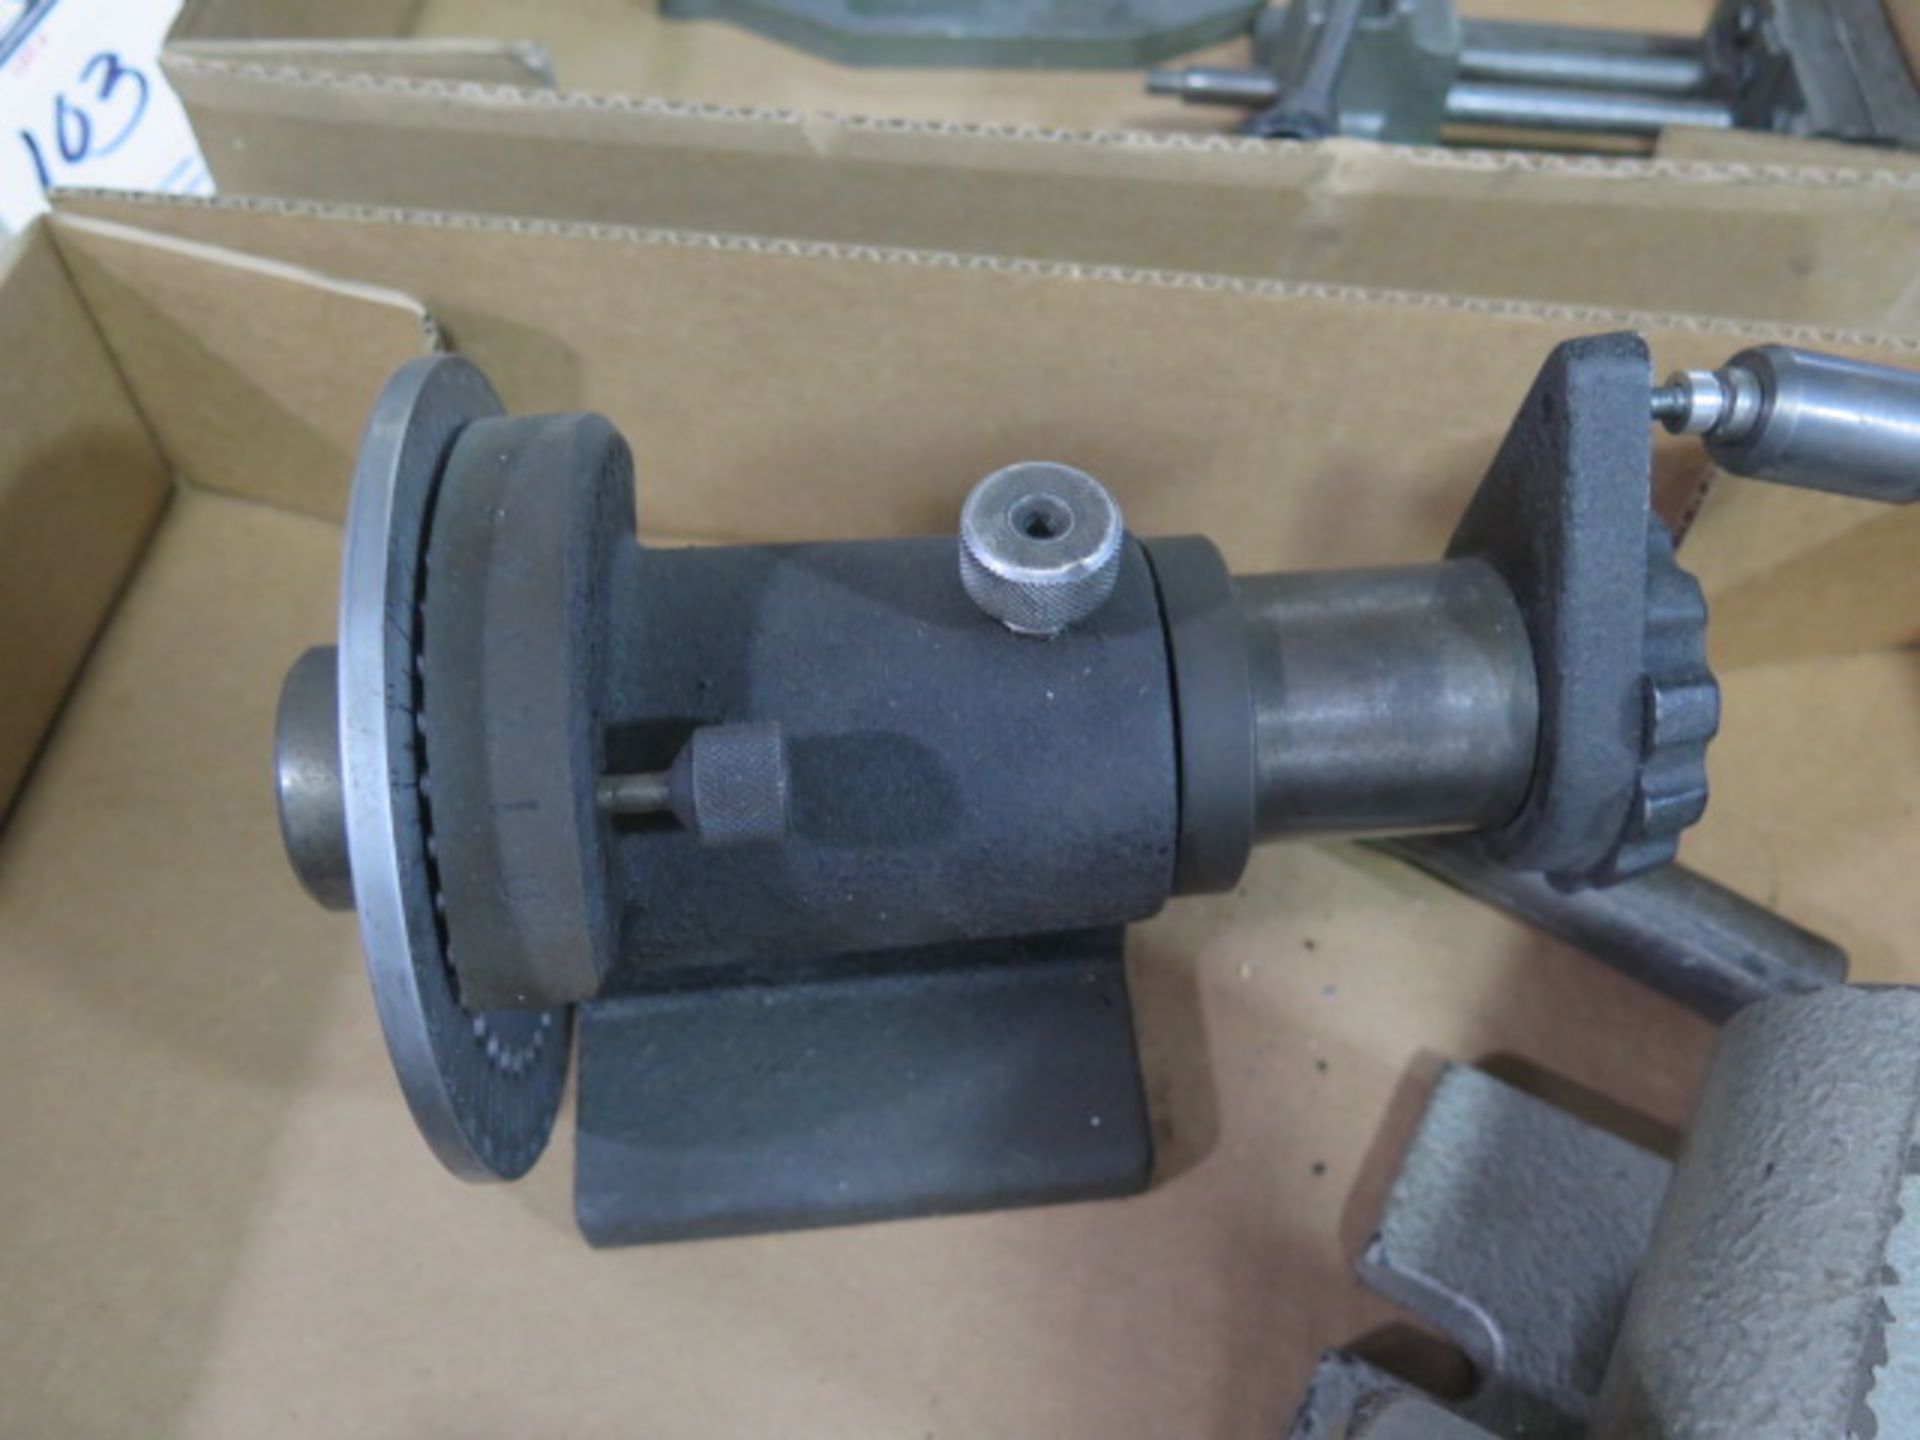 5C Spin Fixture and Collet Closer (SOLD AS-IS - NO WARRANTY) - Image 3 of 4